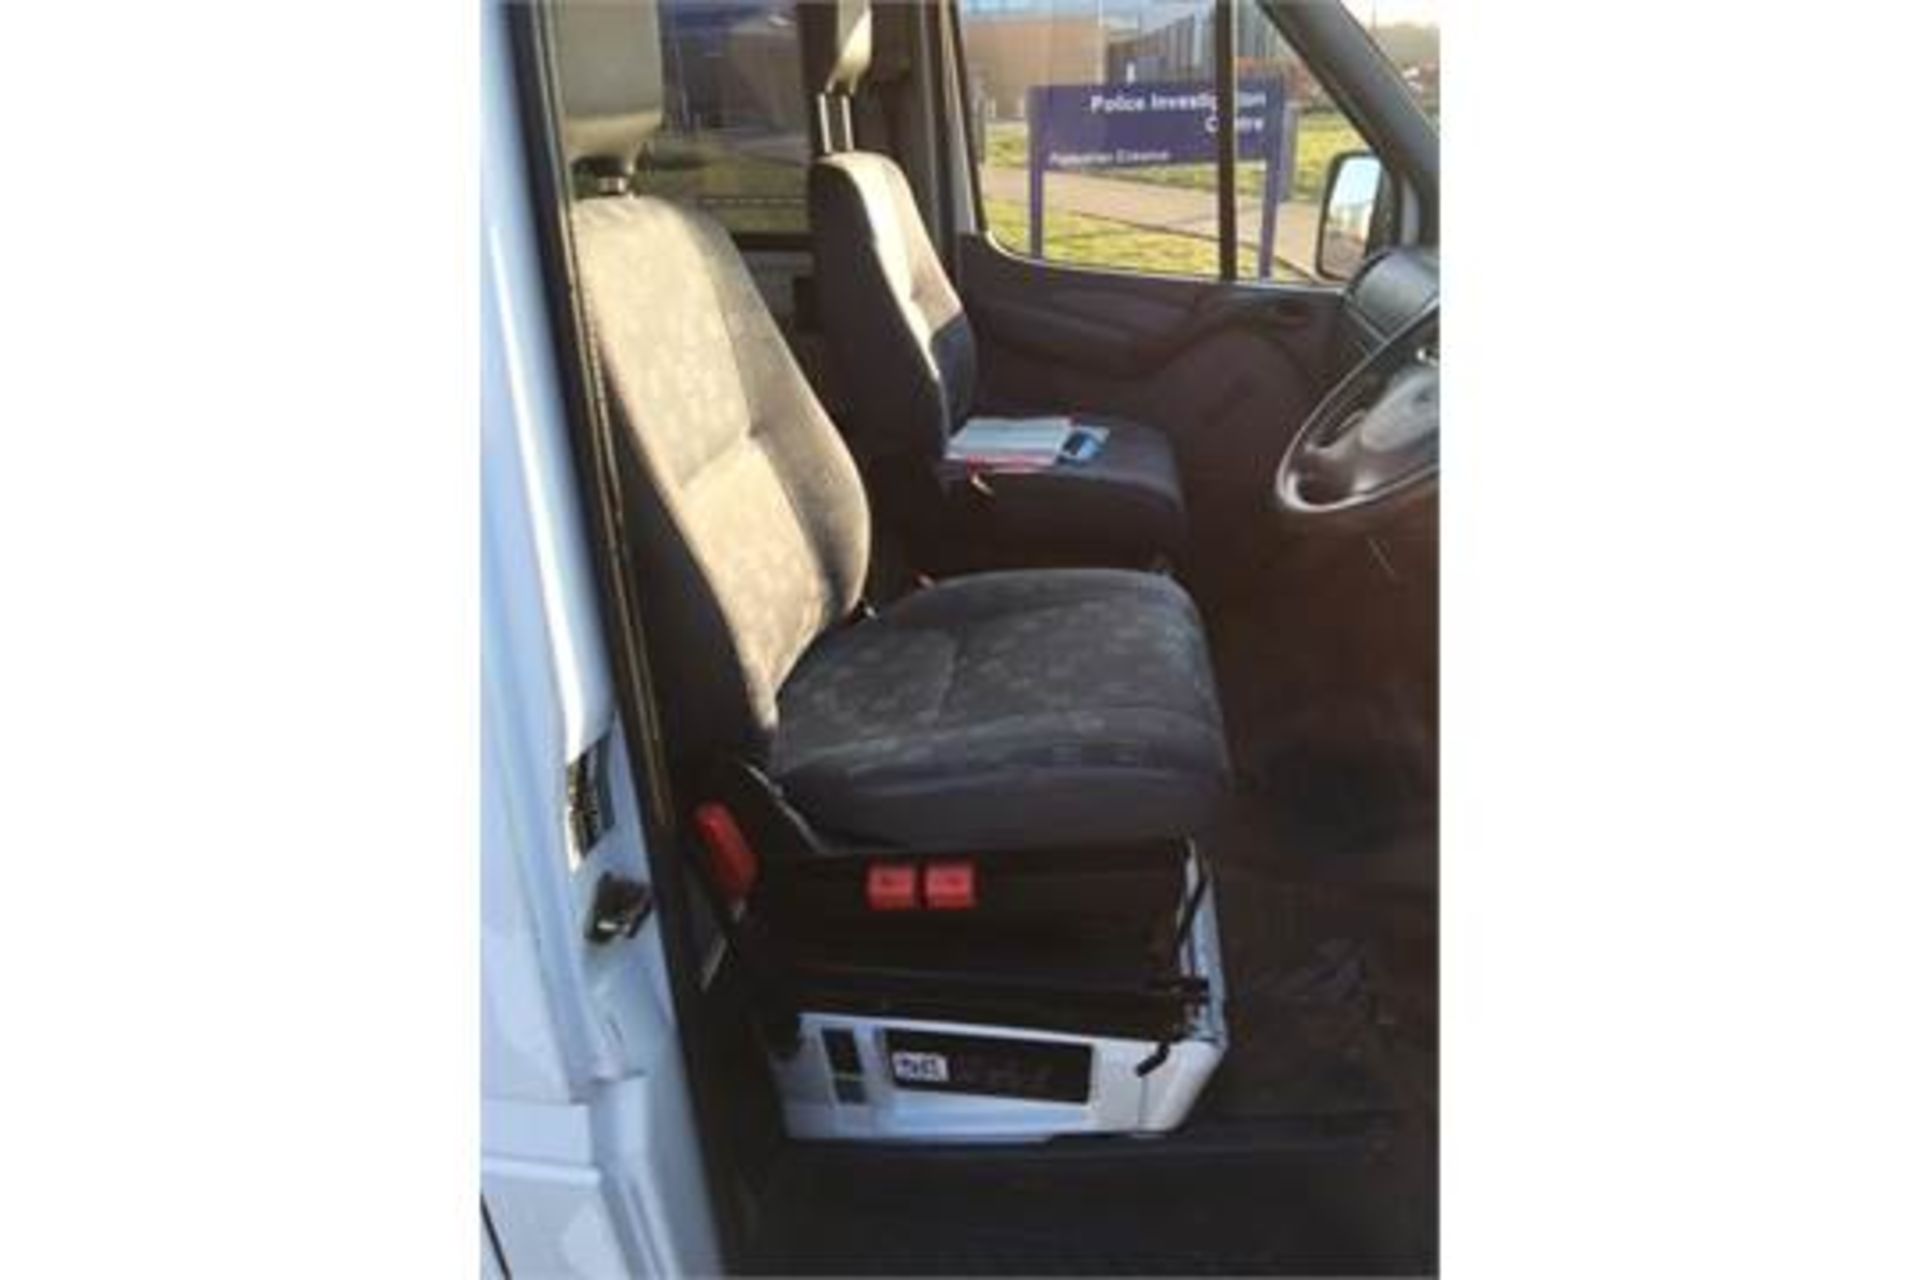 2005 Mercedes Sprinter 311 cdi 2148cc Diesel Van with side windows Owned and used by the police from - Image 17 of 23